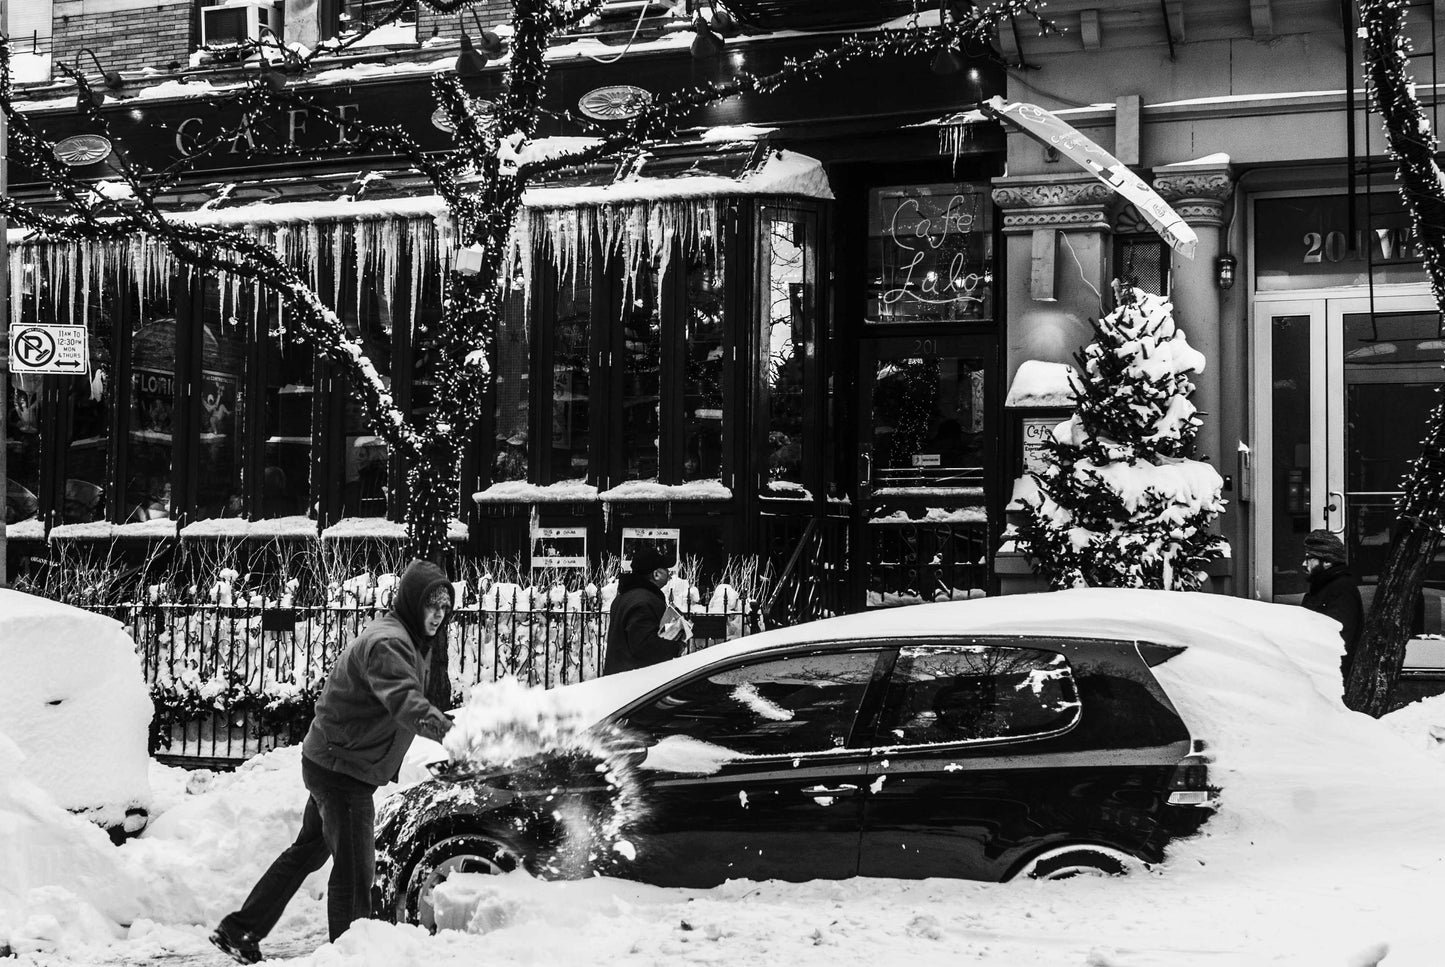 Capturing the life of a New Yorker during a snowy winter on the Upper West Side